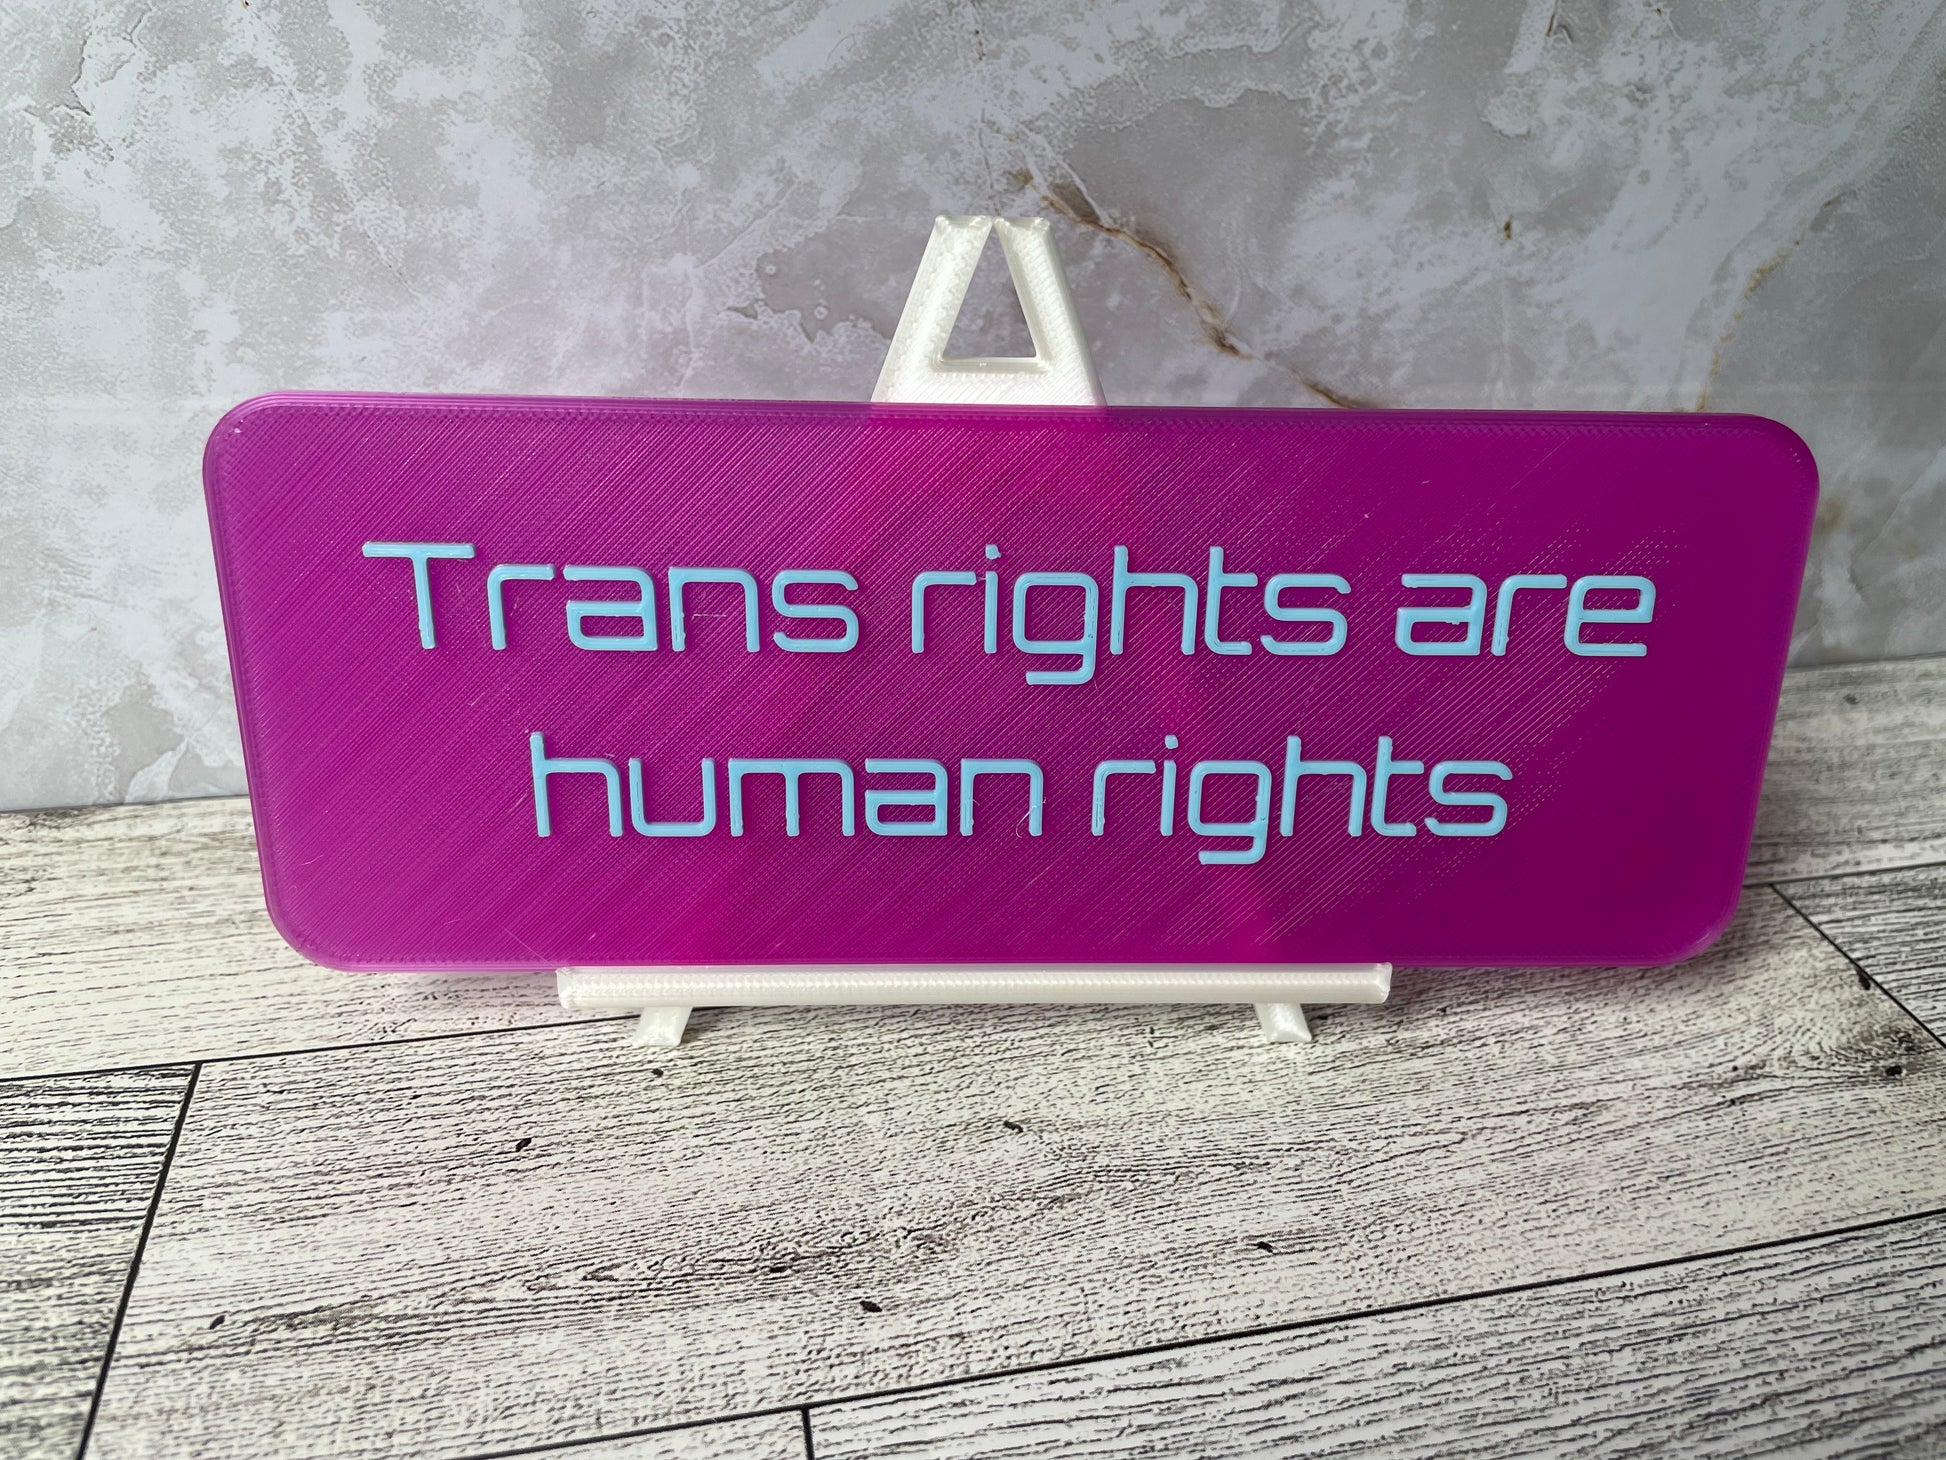 The text "Trans rights are human rights" is in light blue text on a translucent purple sign. The sign is on a shiny white easel on a light woodgrain desk. The wall is a light marble with shades of white and tan.